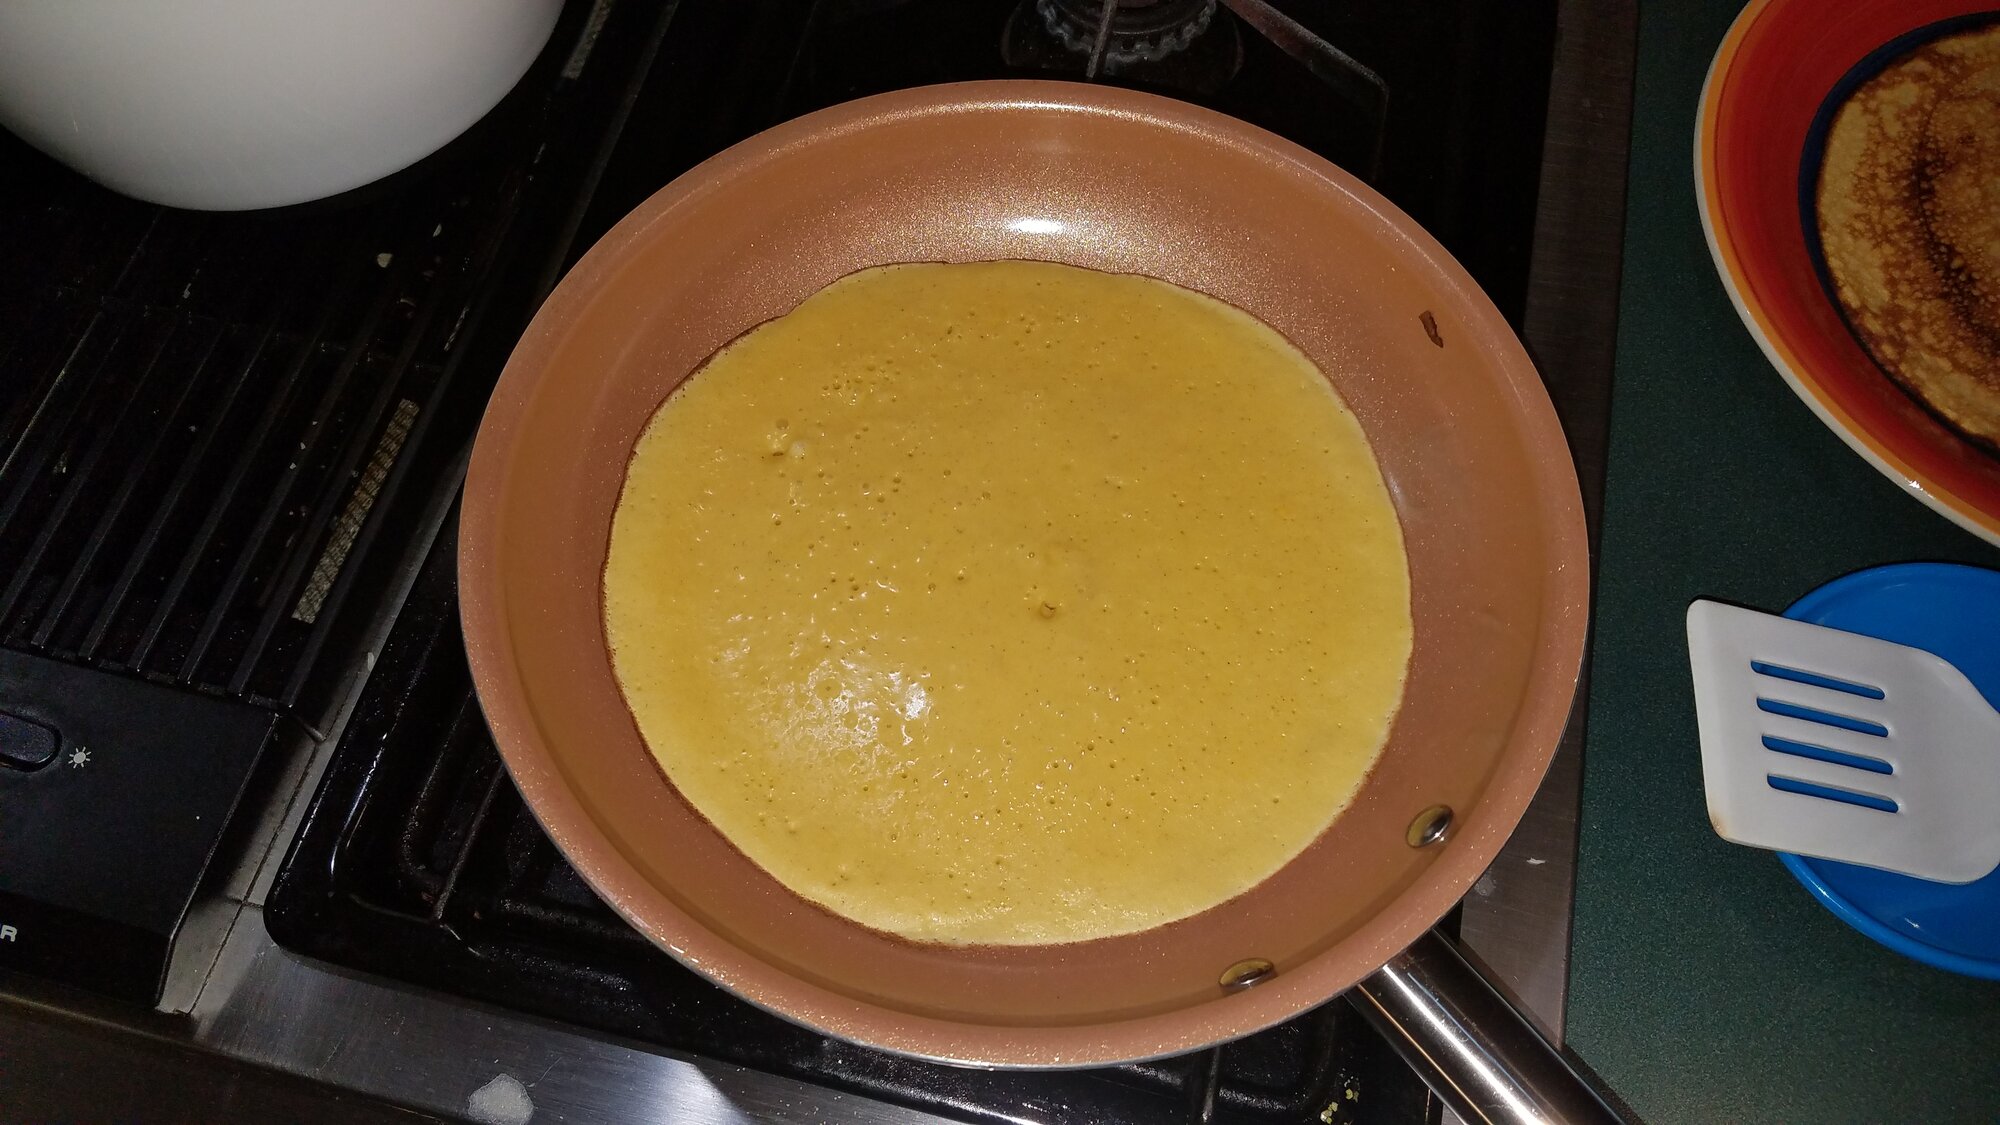 Pancake, made with duck-eggs